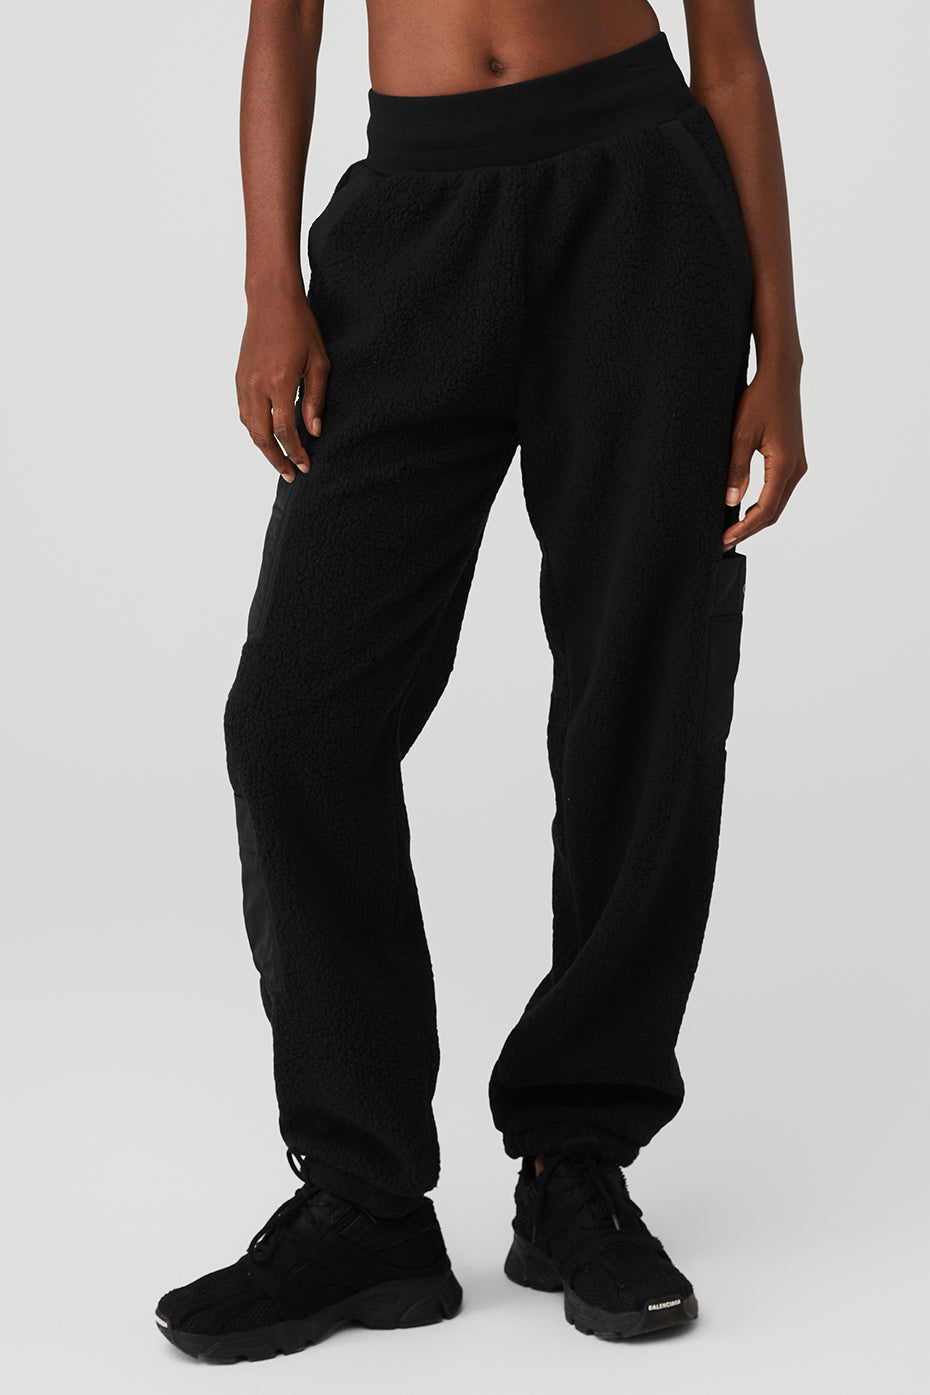 Buy Alo Soho Sweatpants - Anthracite At 58% Off